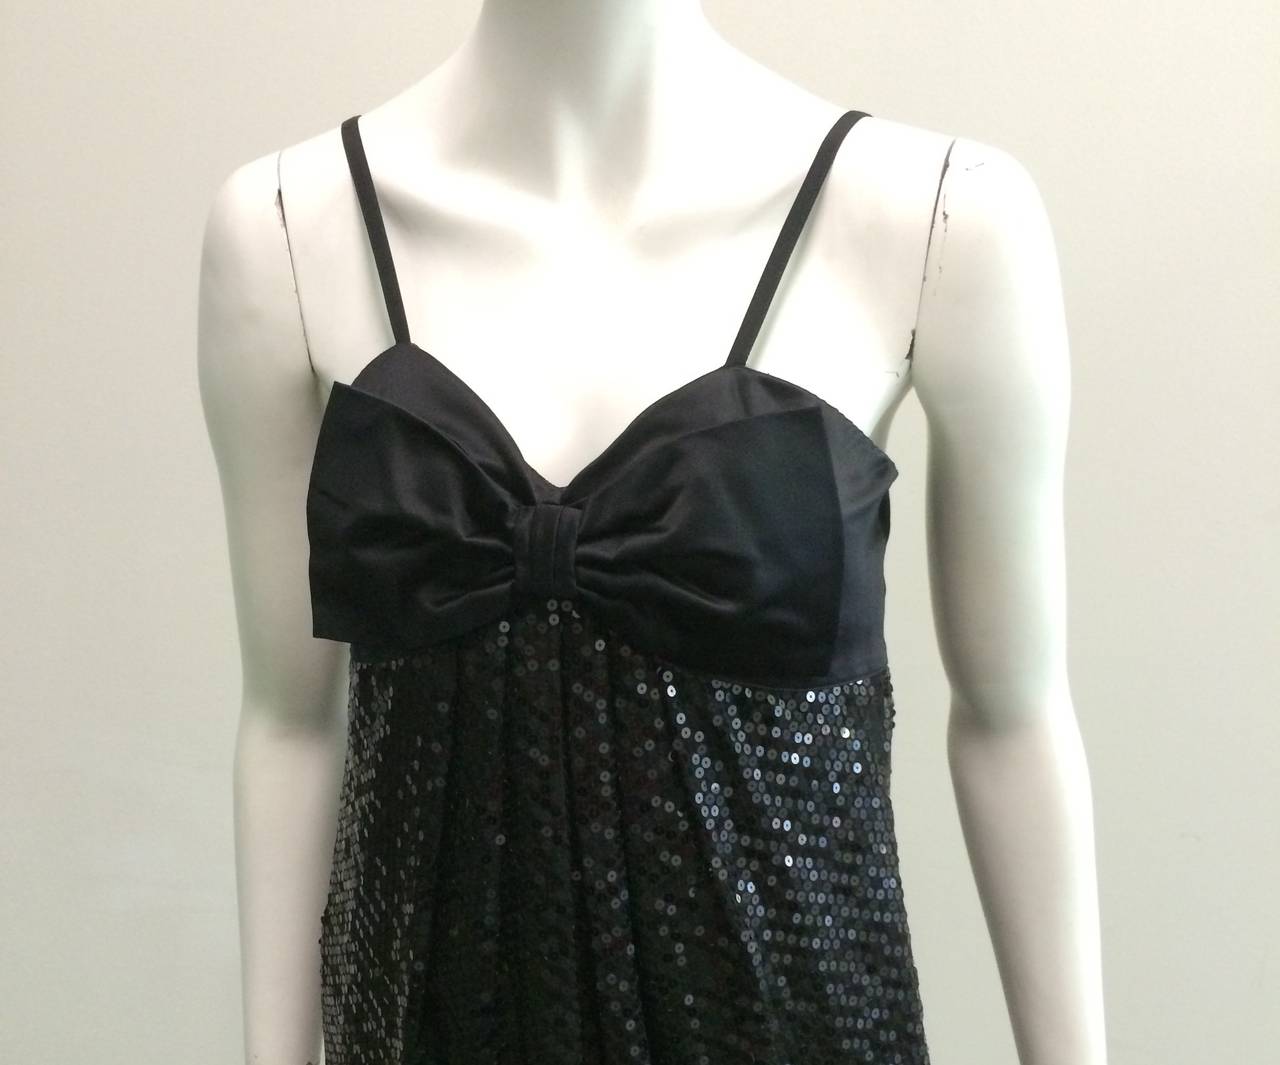 Louis Feraud 1980s black sequin cocktail dress with bow original size is 10 but fits like a modern USA size 6. Ladies please grab your tape measure so you can measure your bust, waist & hips to make certain this gorgeous piece will fit your lovely